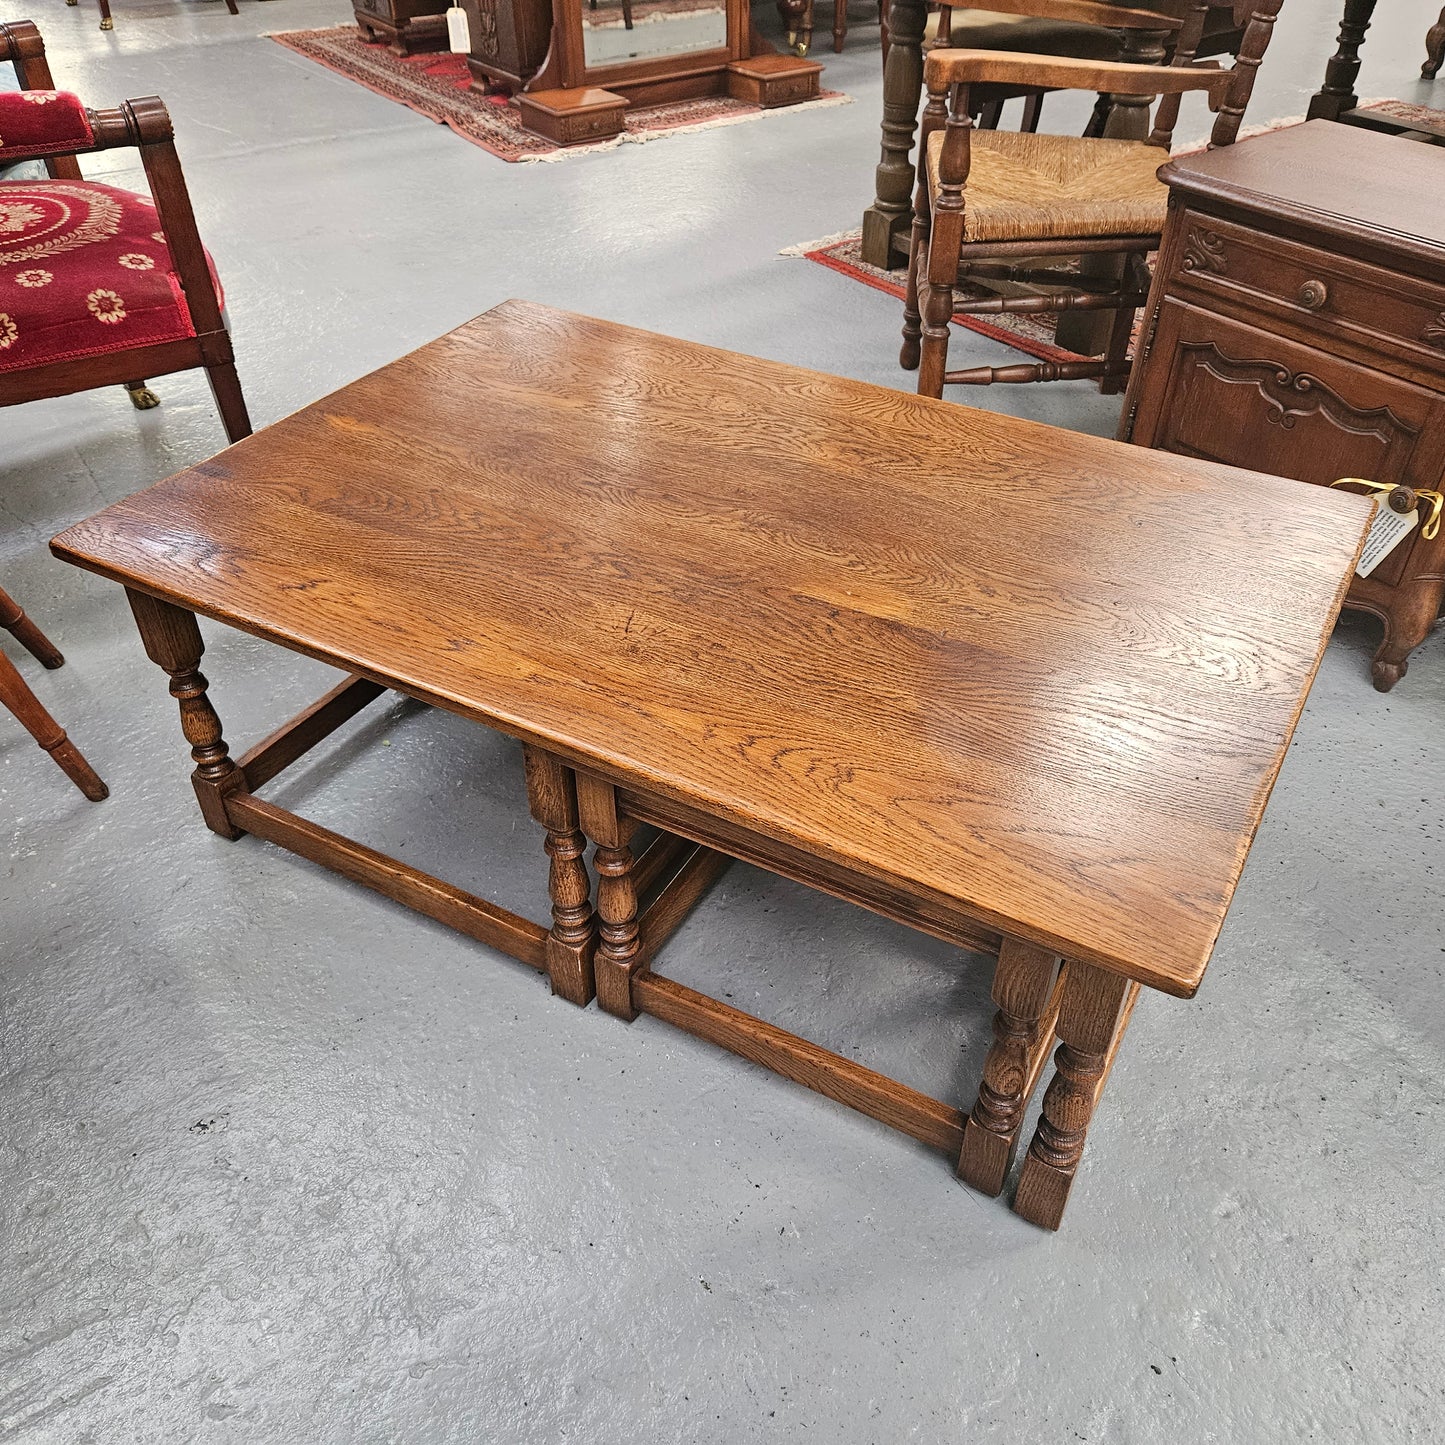 Large Period Style French Oak Coffee Table With Two Pull Out Side Tables